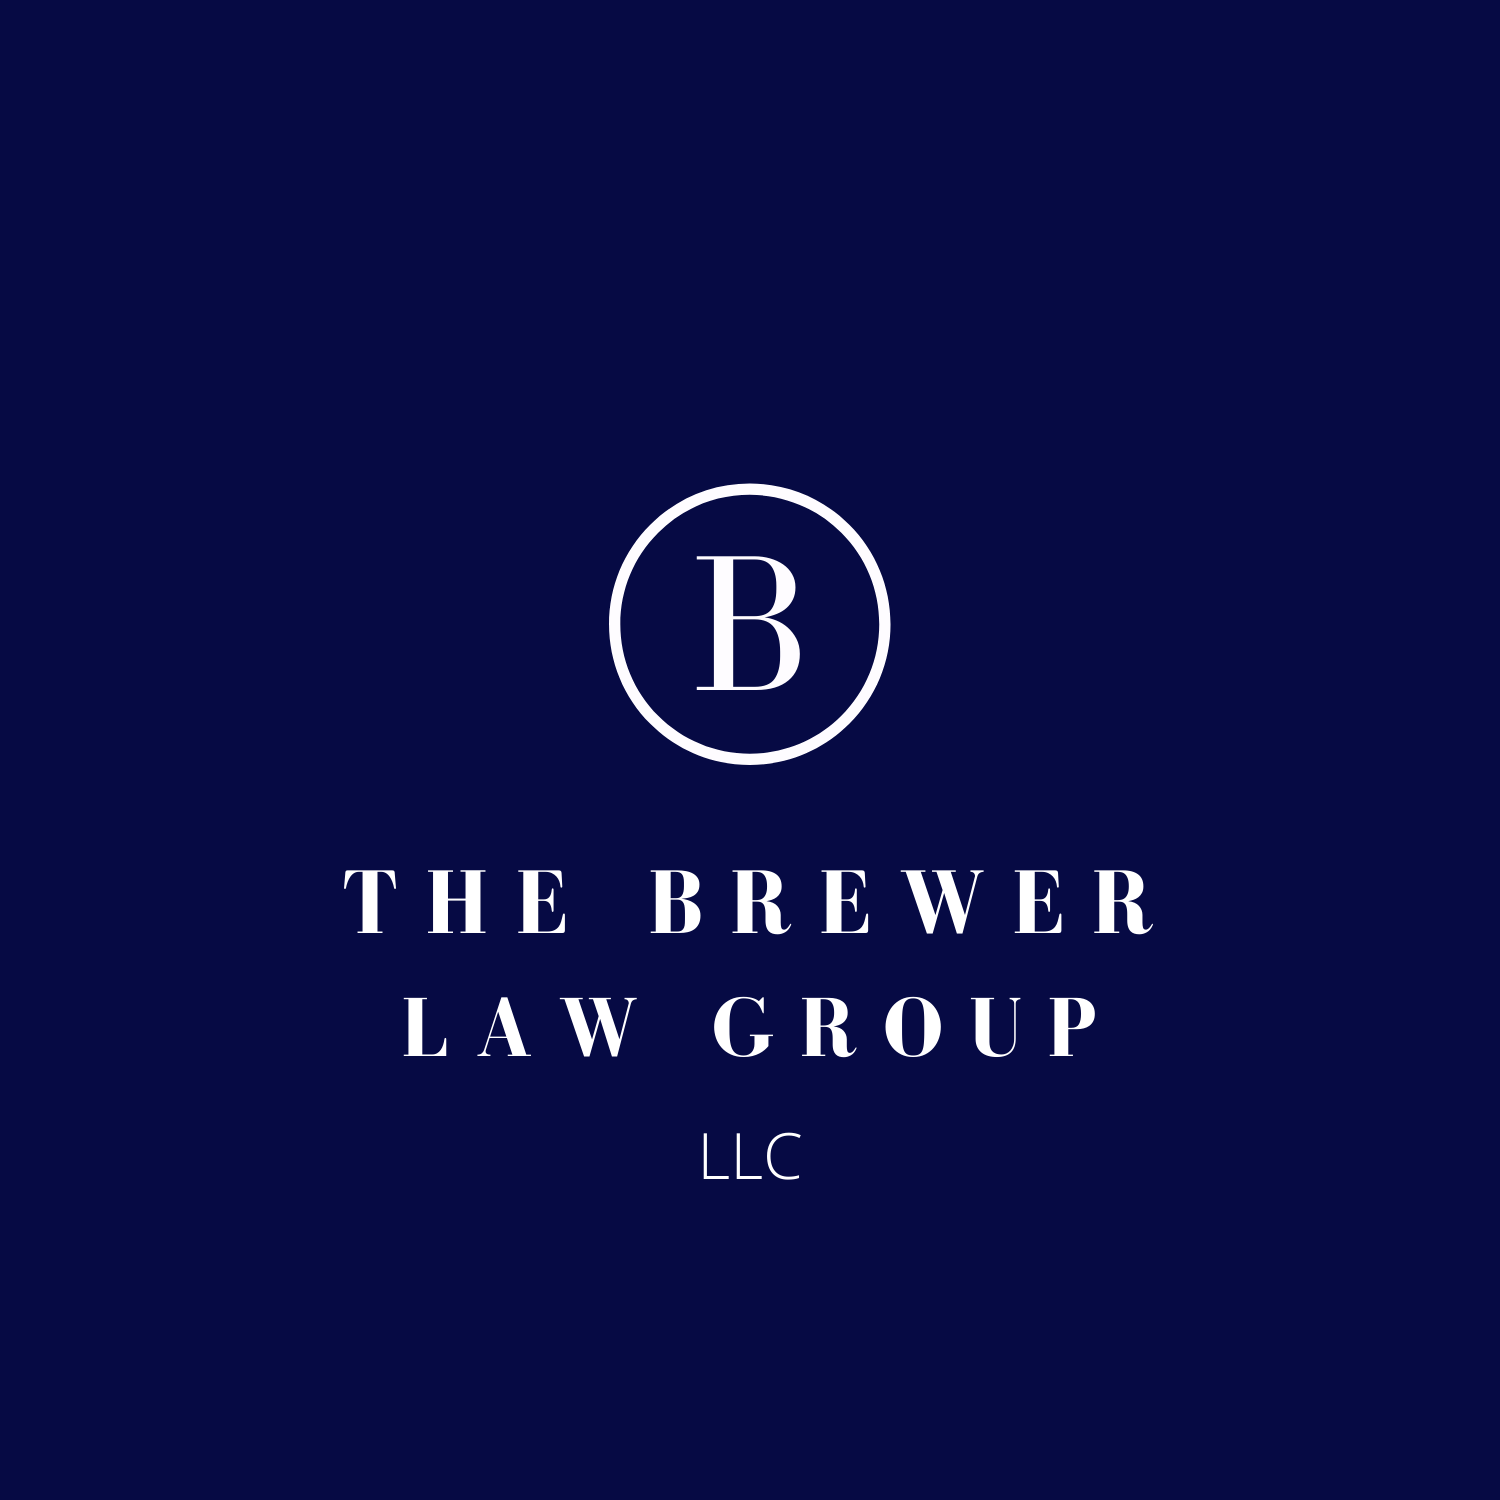 The Brewer Law Group, LLC. 